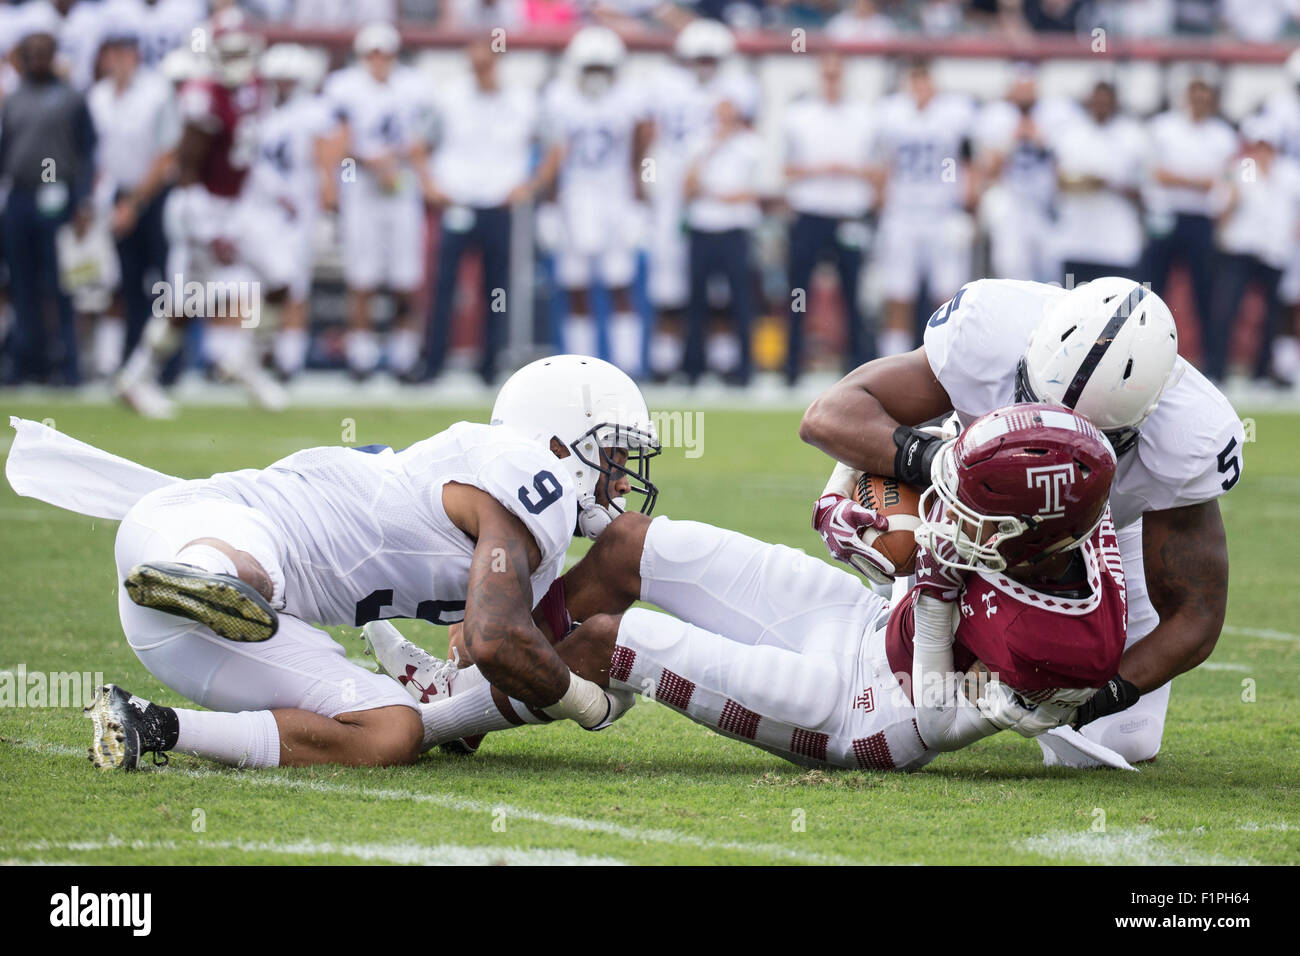 September 5, 2015: Temple Owls wide receiver Robby Anderson (19) gets taken down by Penn State Nittany Lions linebacker Nyeem Wartman-White (5) and safety Jordan Lucas (9) during the NCAA football game between the Penn State Nittany Lions and the Temple Owls at Lincoln Financial Field in Philadelphia, Pennsylvania. The Temple Owls won 27-10. Christopher Szagola/CSM Stock Photo